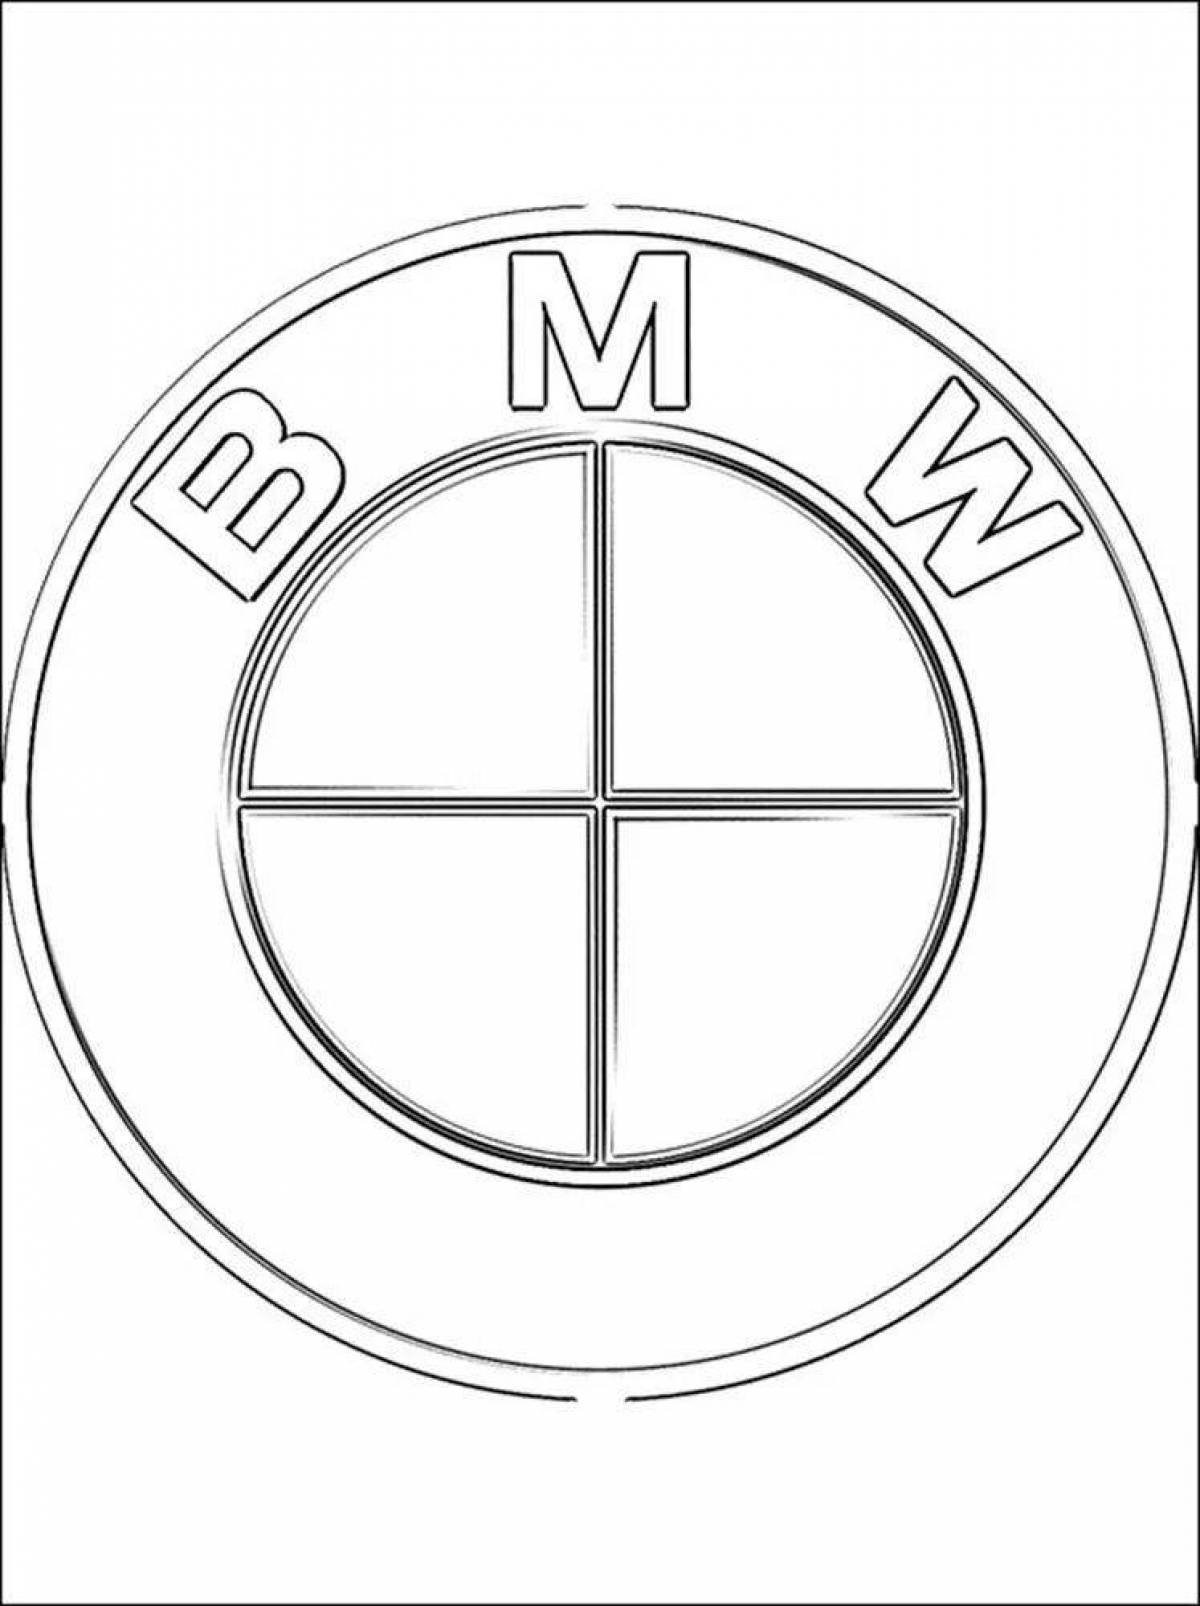 Coloring book innovation badge bmw